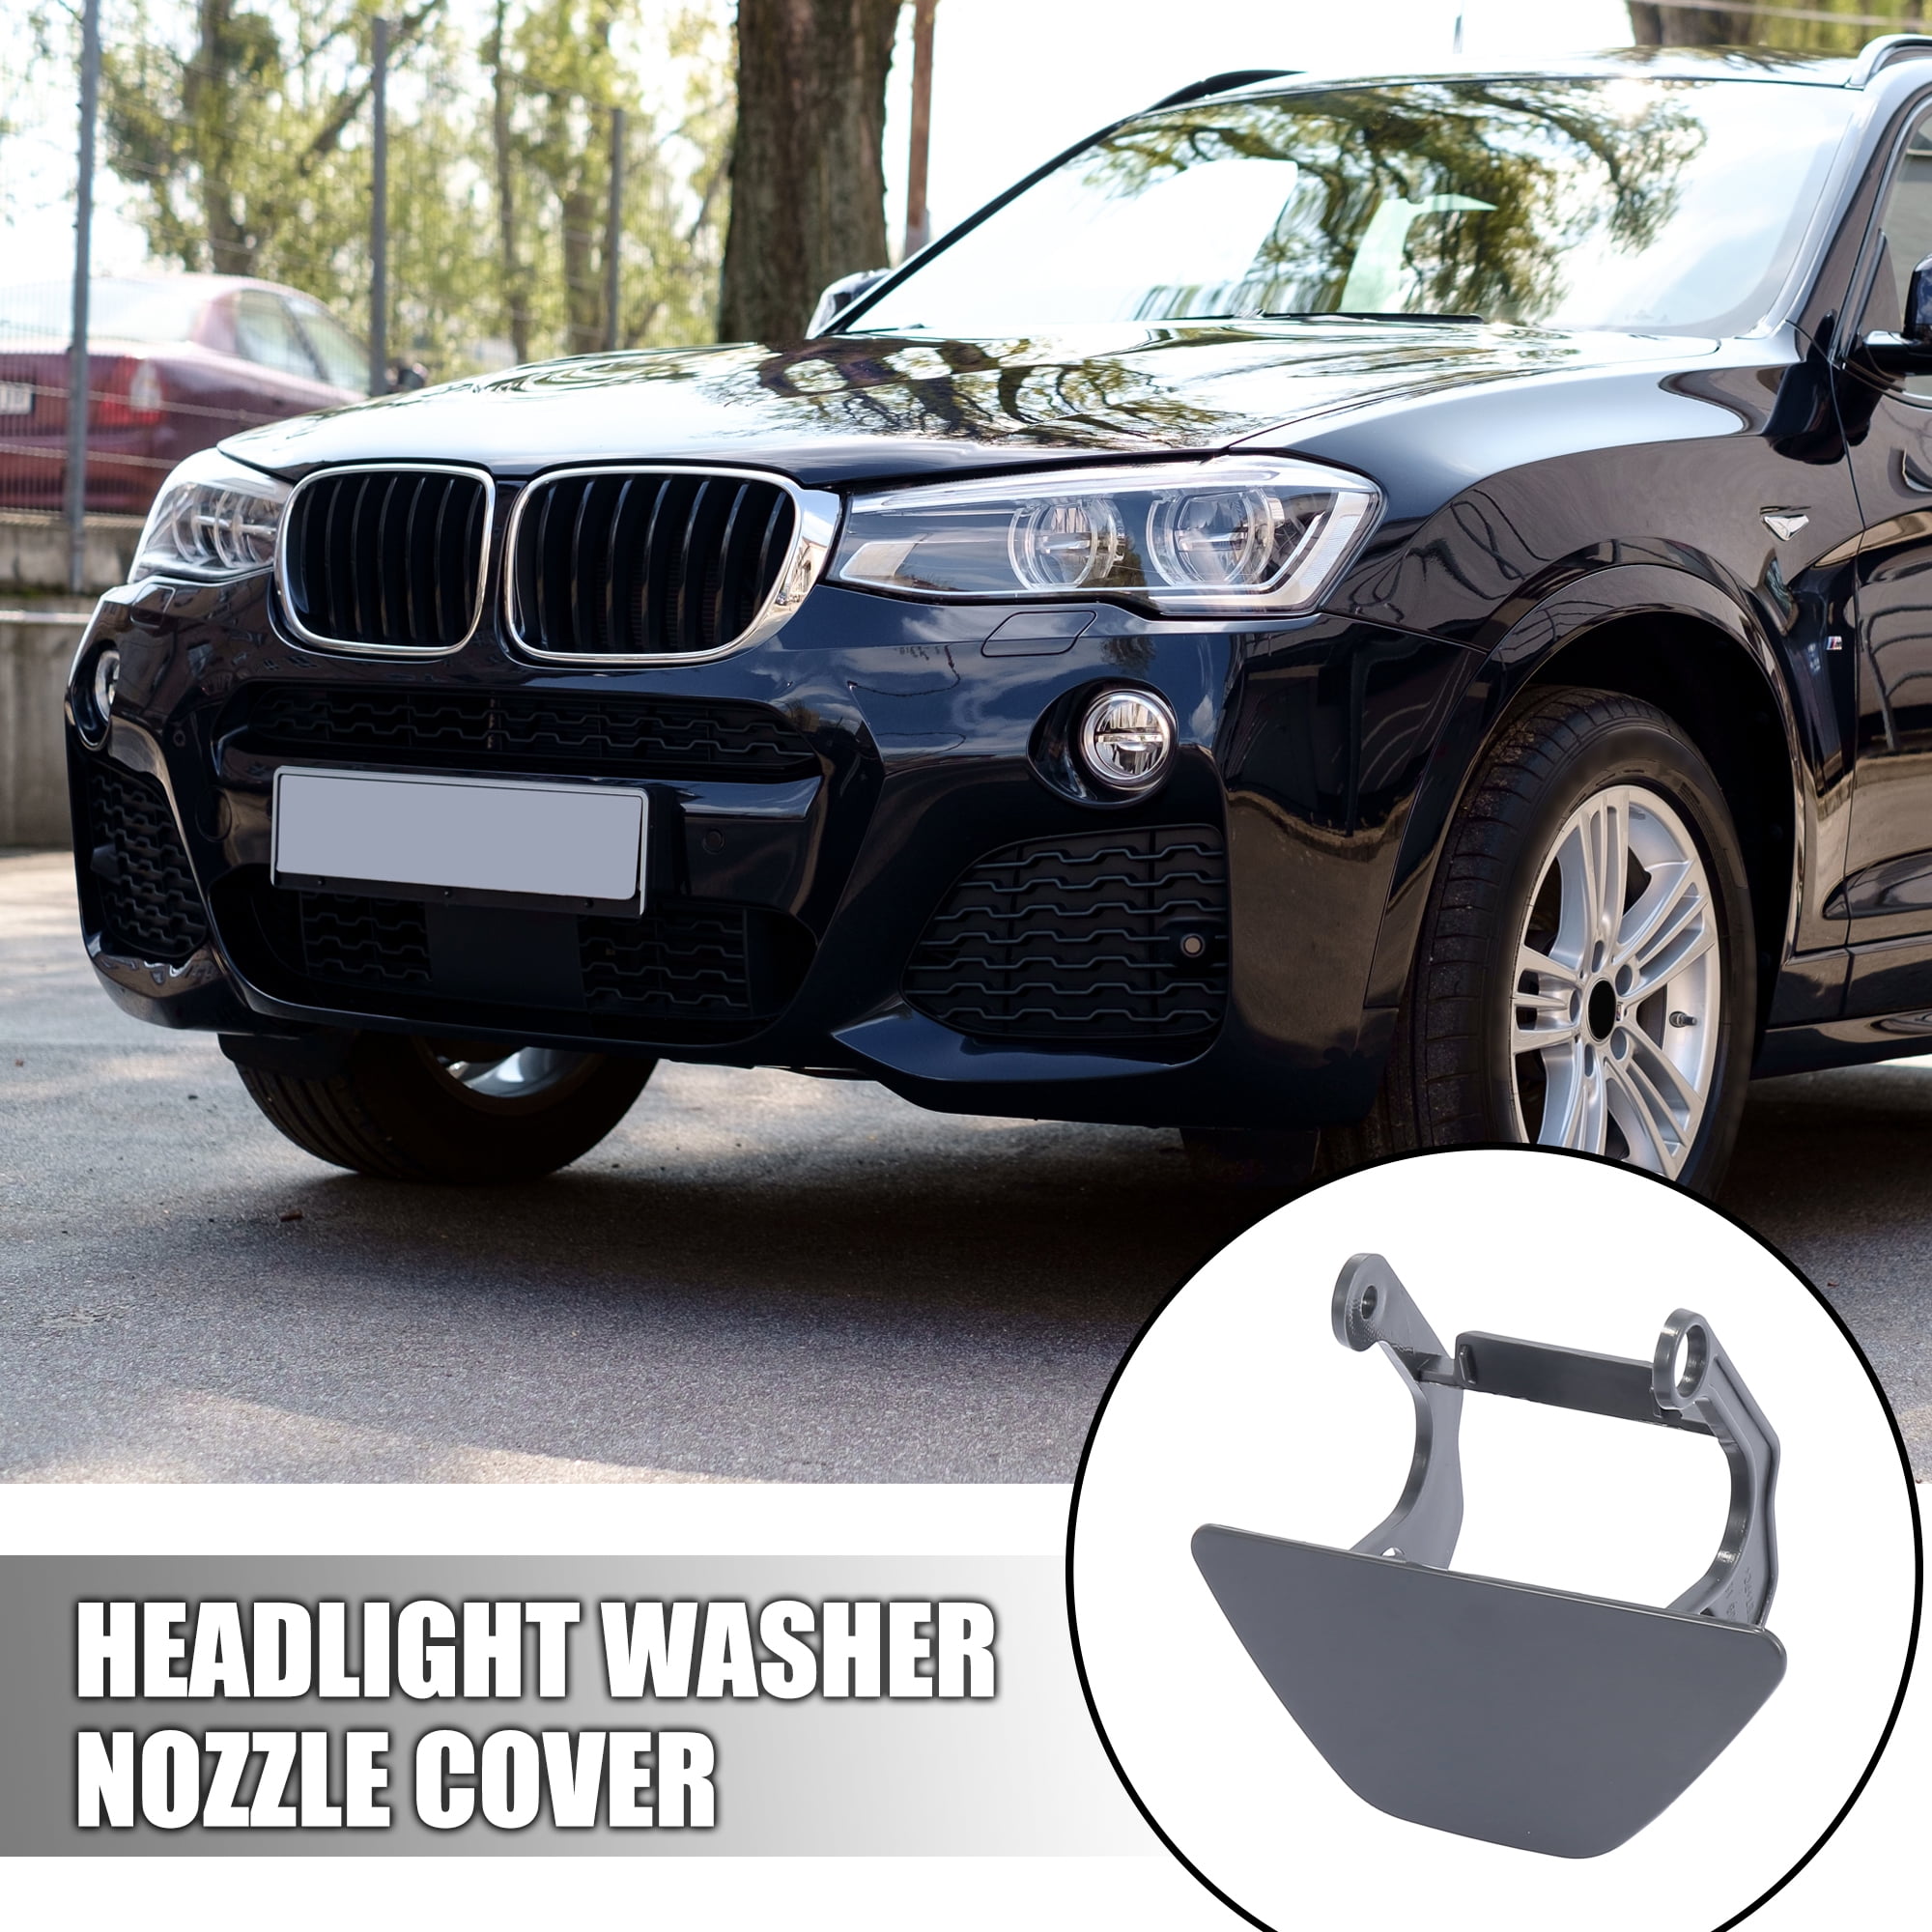 2x spray nozzle headlight cleaning cover left right for BMW X3 F25 10-14